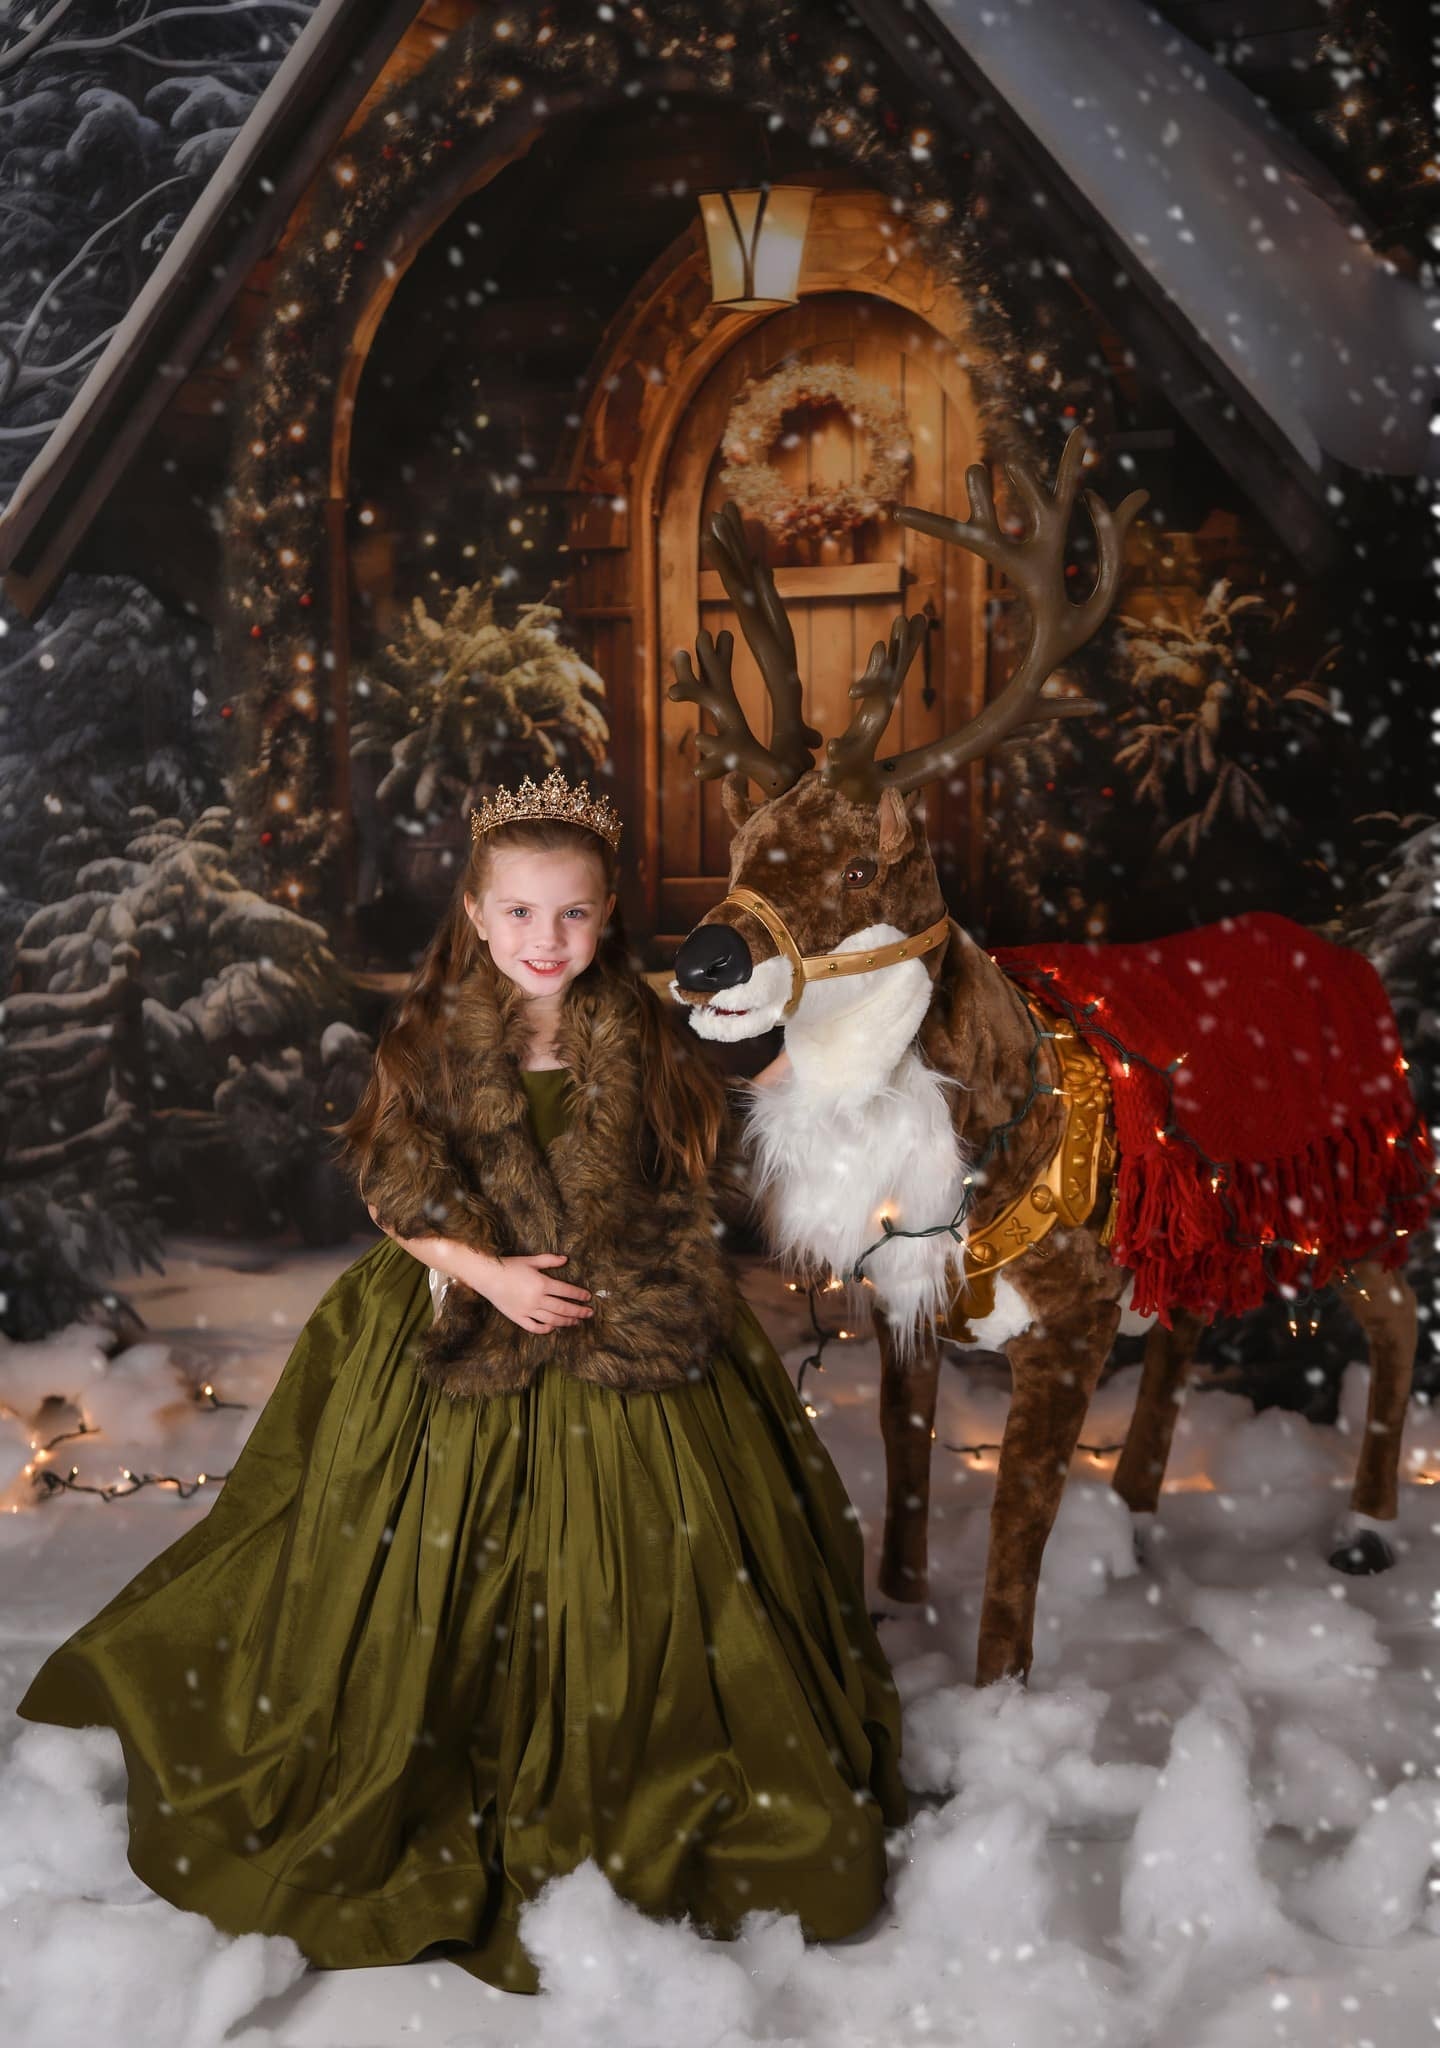 Kate Christmas Wooden House Backdrop Designed by Chain Photography